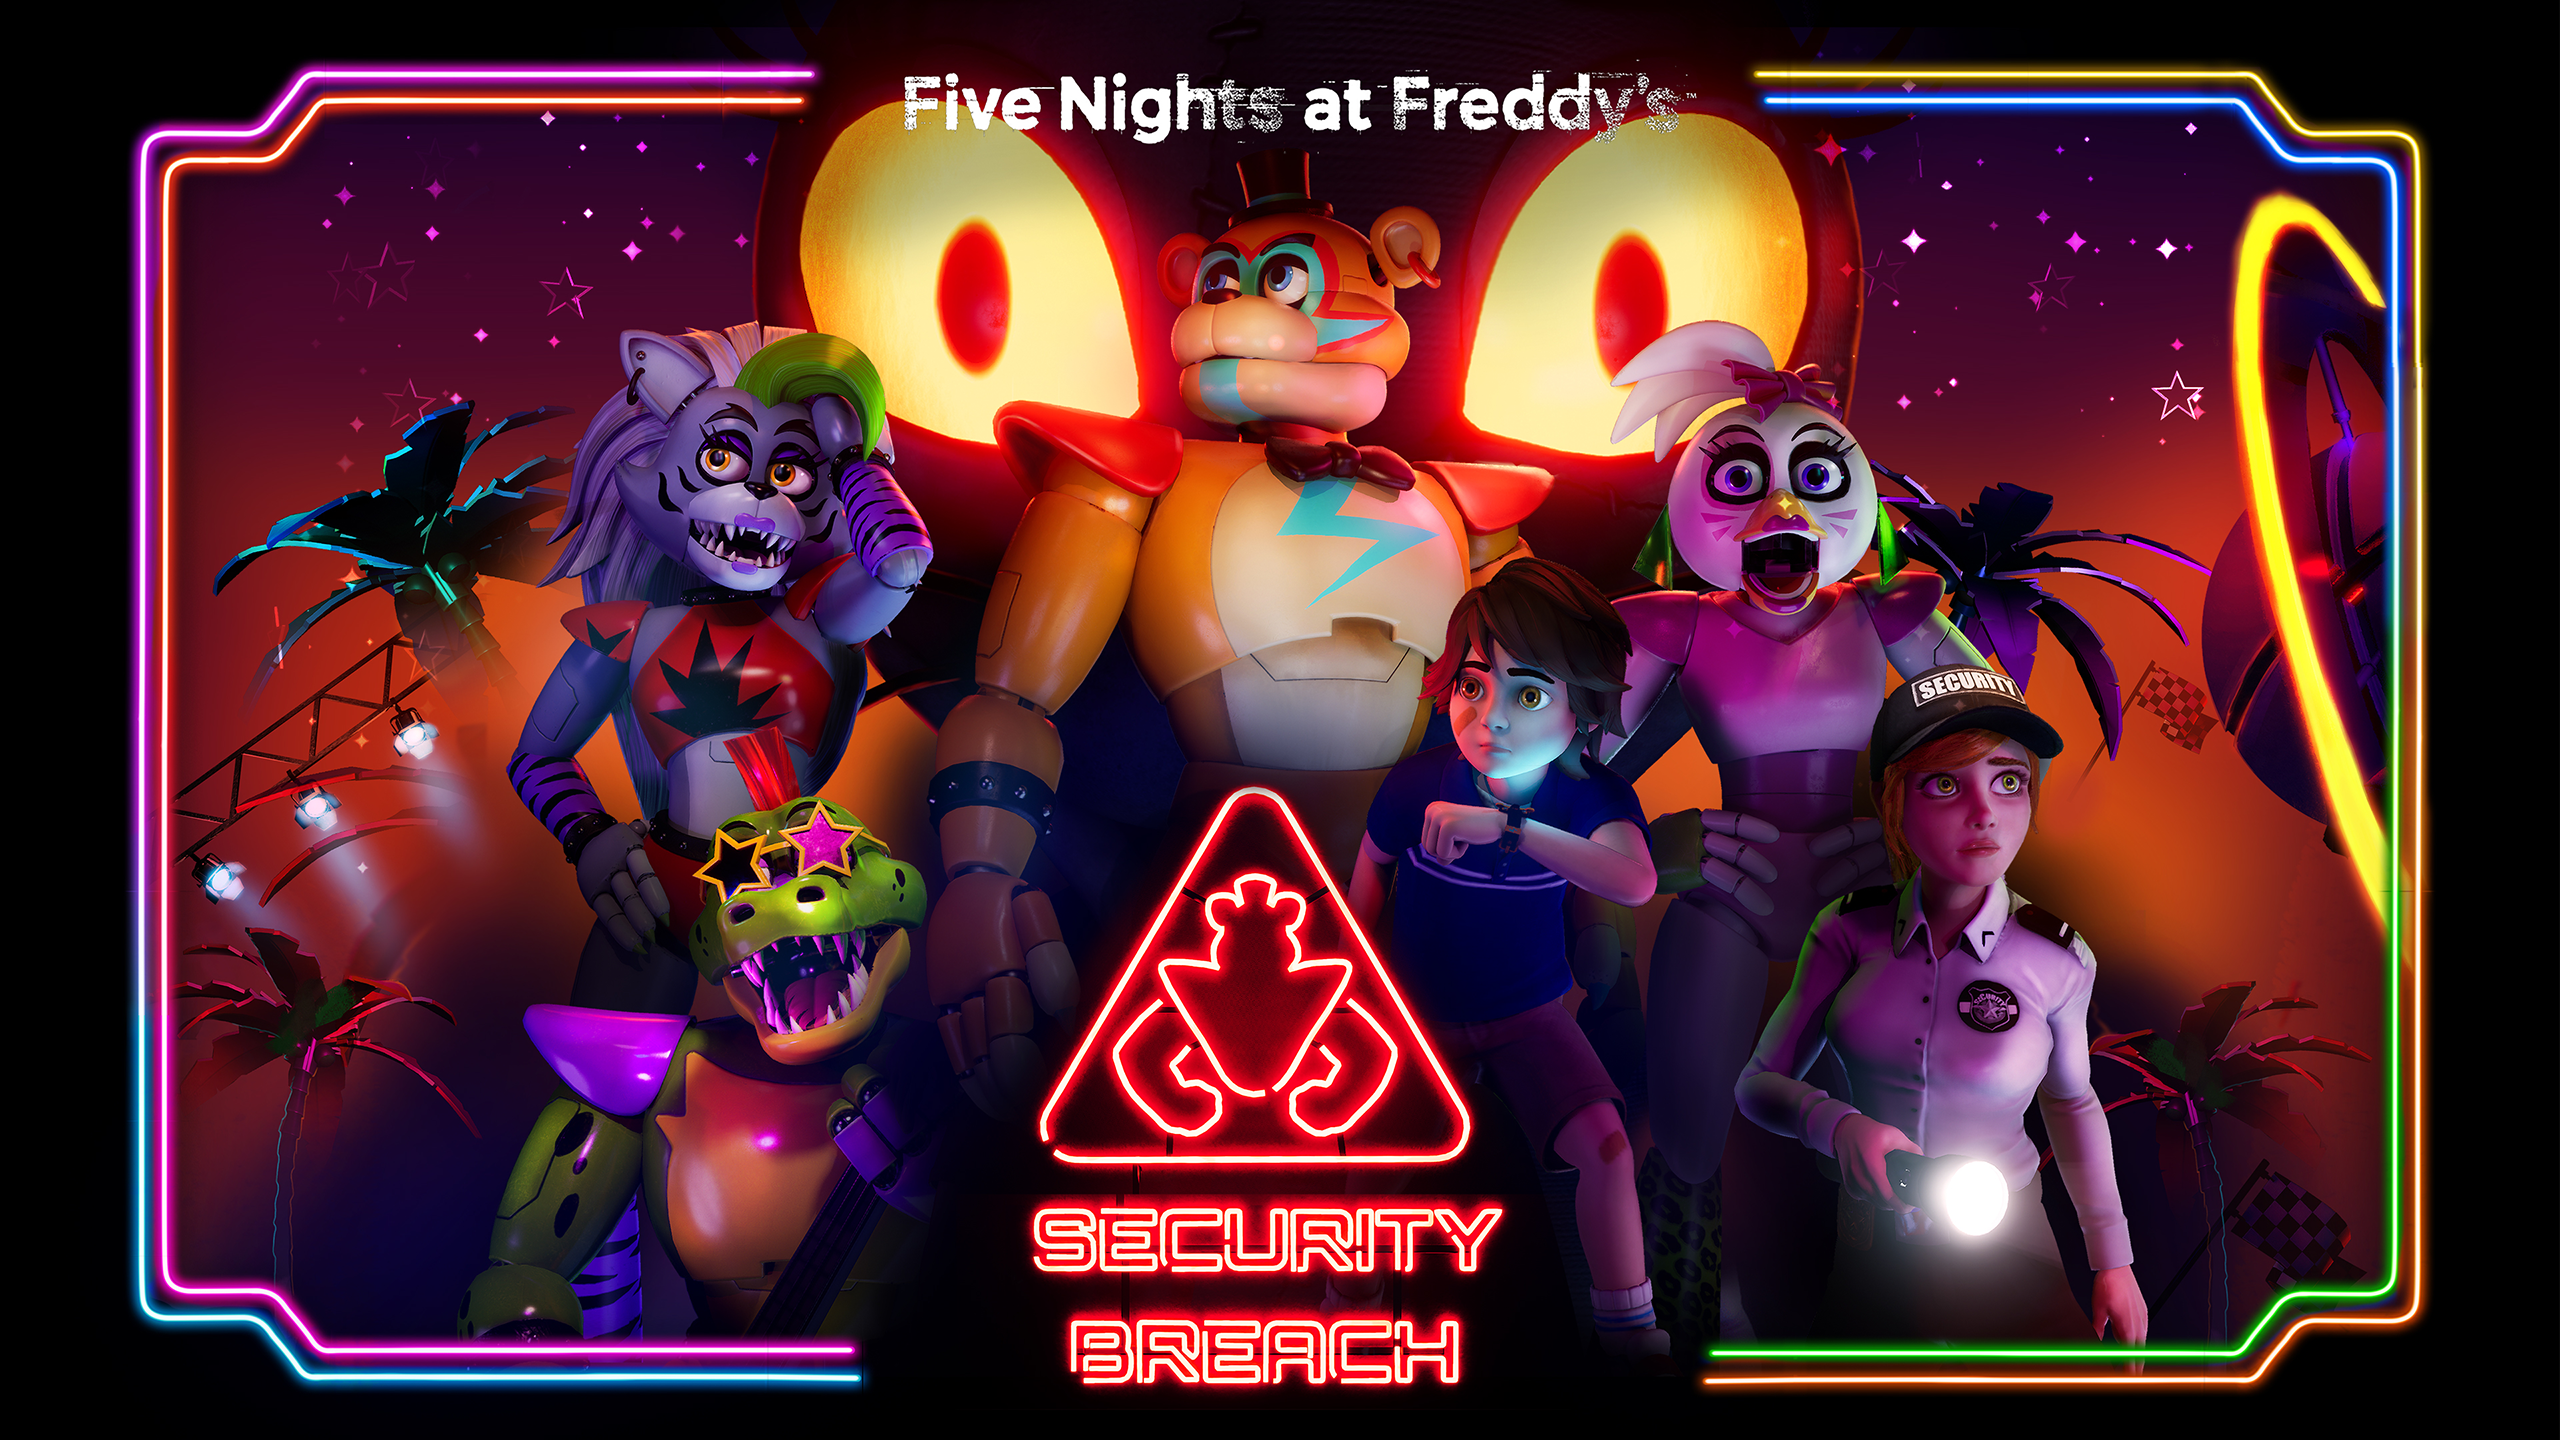 Download Five Nights at Freddy’s 4